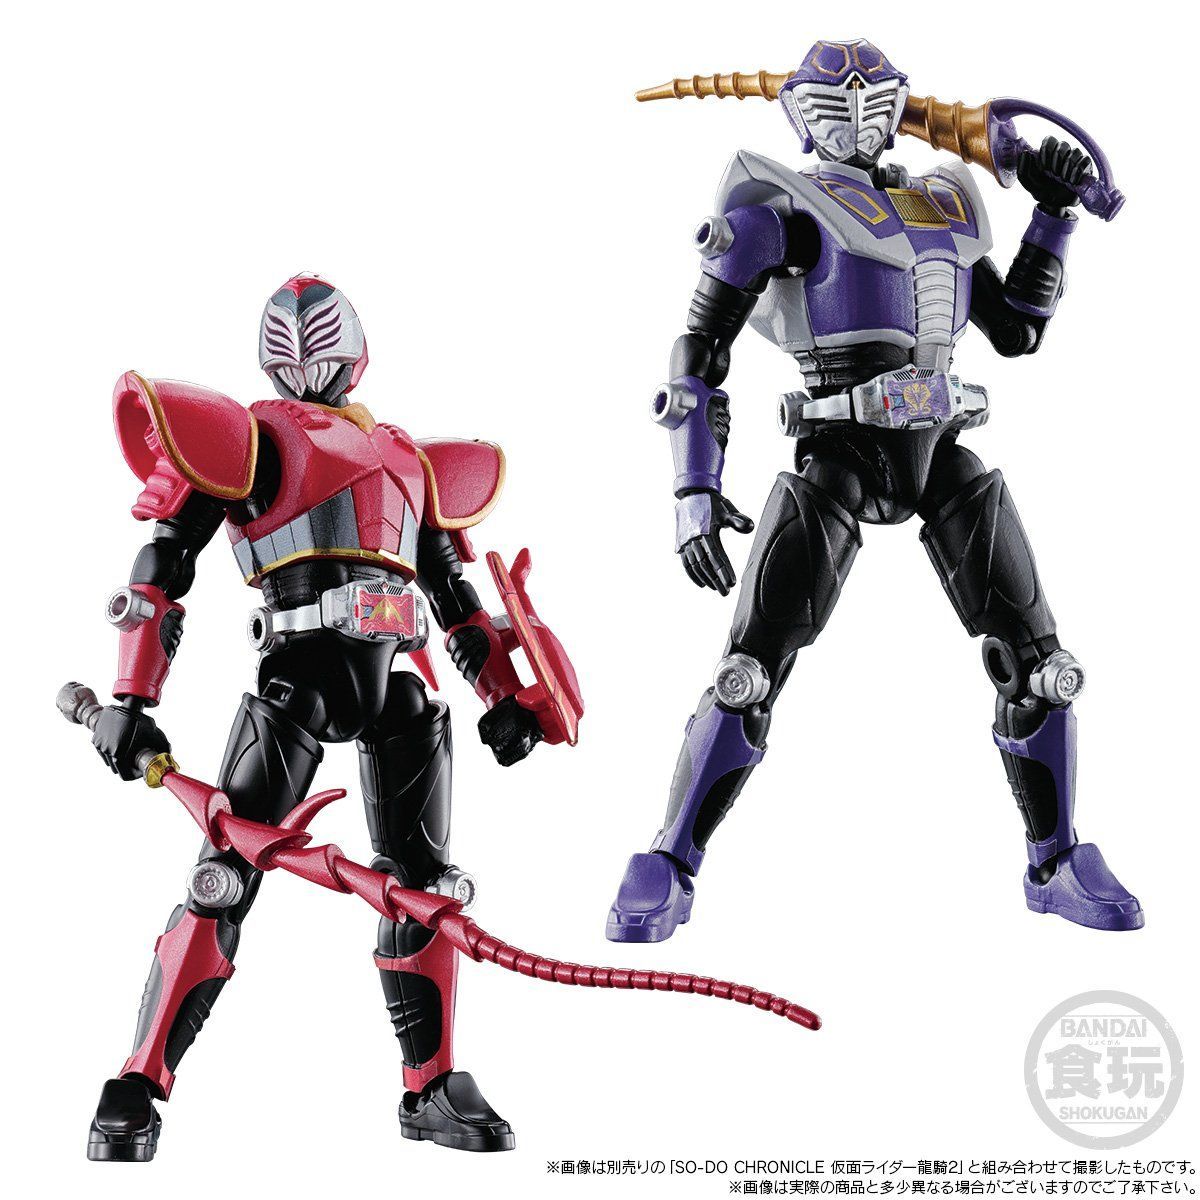 SO-DO CHRONICLE 仮面ライダーファイズ 龍騎-connectedremag.com